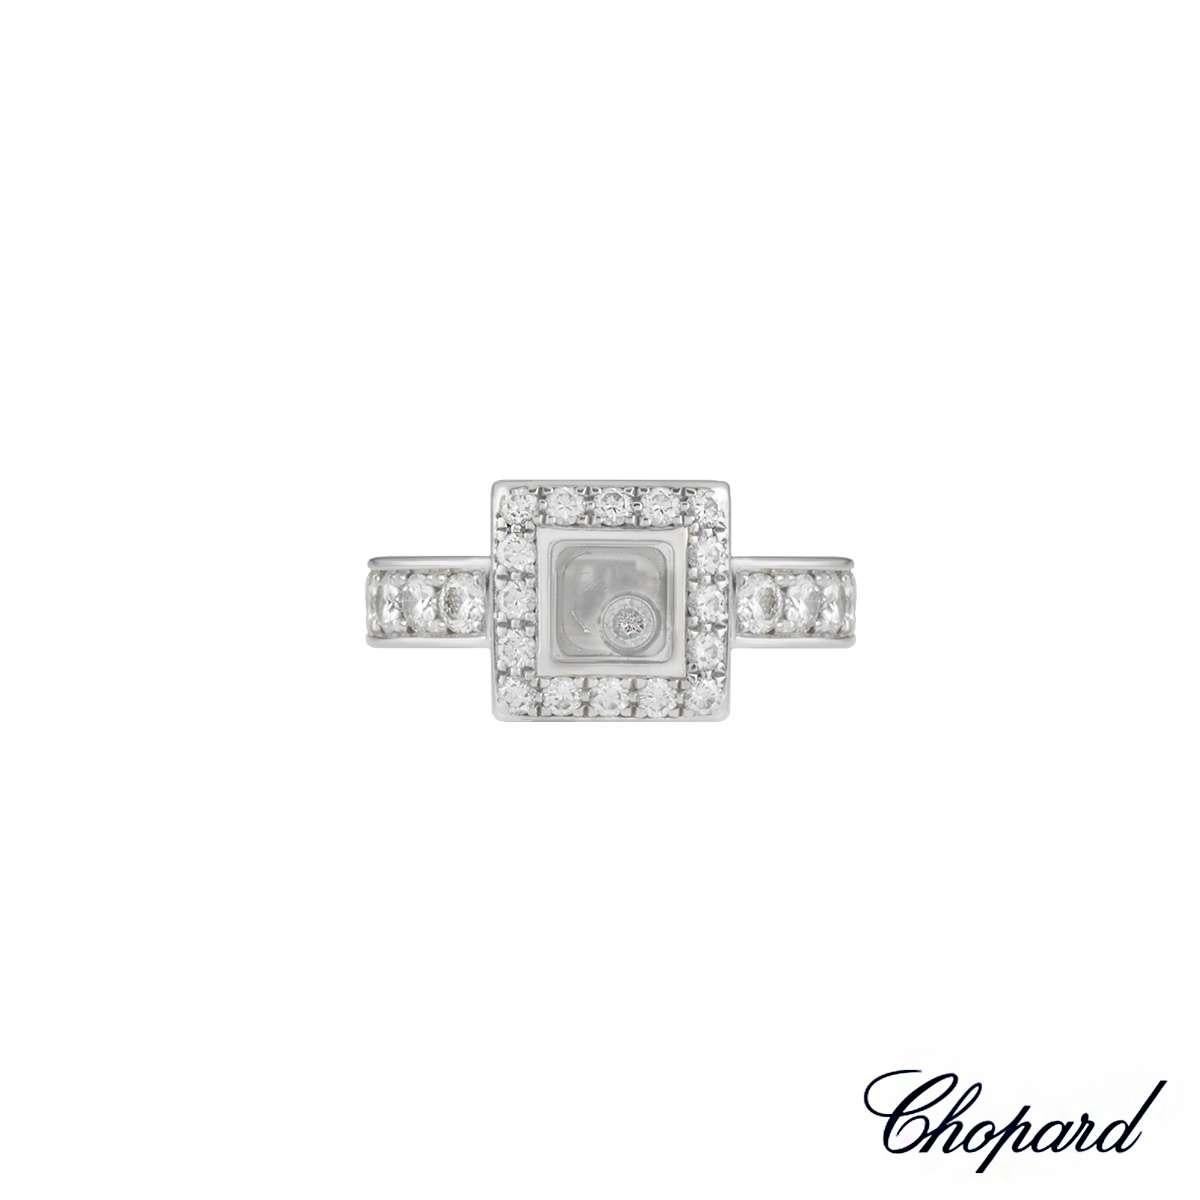 A stylish Chopard 18k white gold diamond set ring from the Happy Diamonds Collection. The ring has a single freely moving round brilliant cut diamond encased behind the Chopard signed glass, totalling 0.05ct. The ring has a further 24 round